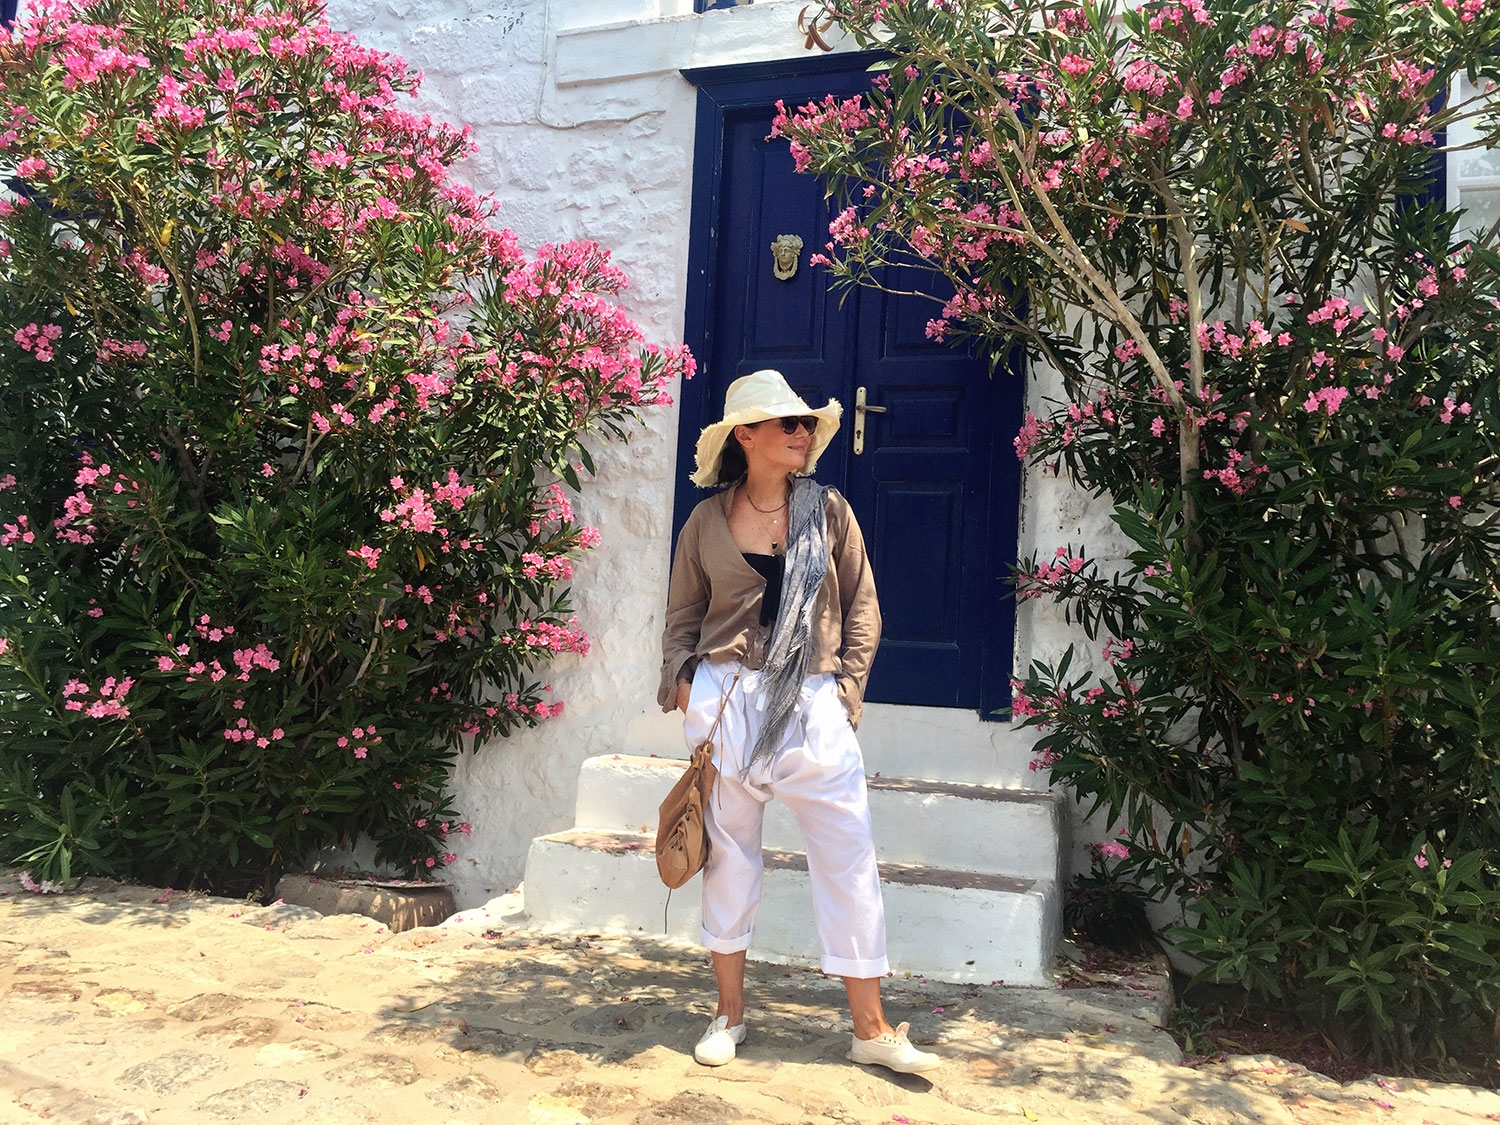 Nicky Zimmermann stands in front of a traditional white and blue Greek building, with native flowers either side of her 